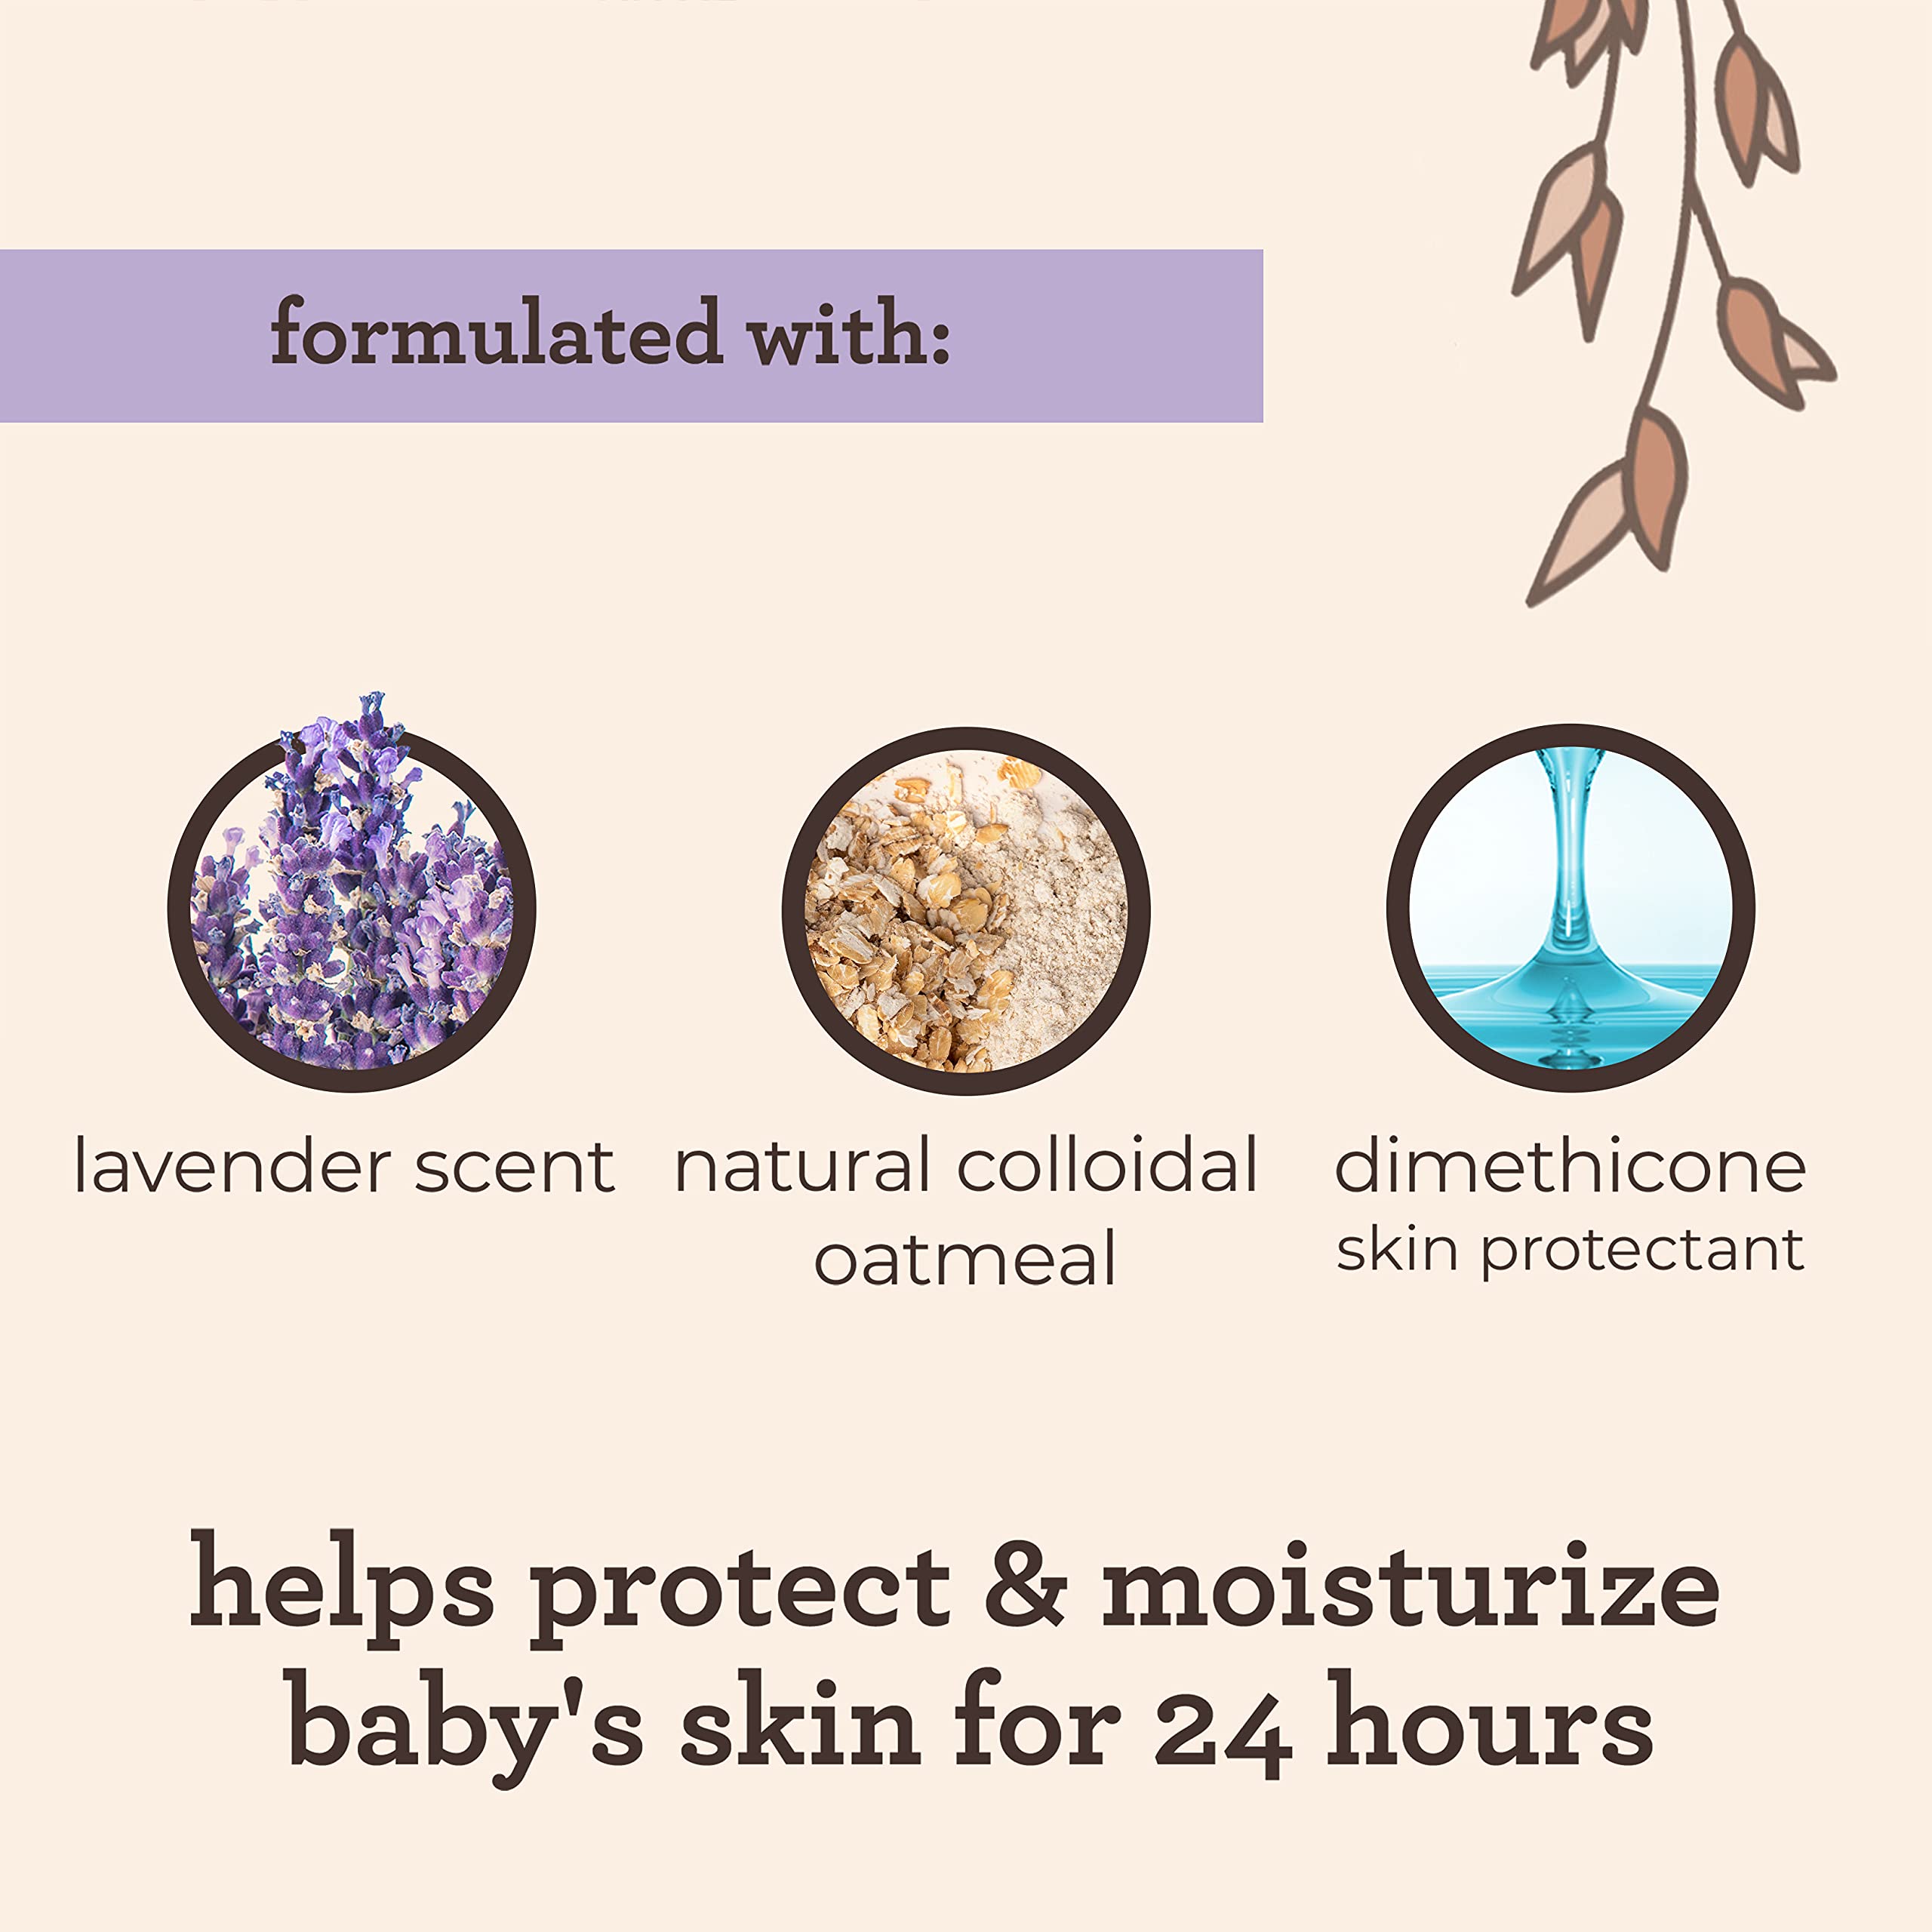 Aveeno Baby Calming Comfort Moisturizing Lotion with Relaxing Lavender & Vanilla Scents, Non-Greasy Body Lotion with Natural Oatmeal & Dimethicone, Paraben- & Phthalate-Free, 8 fl. oz